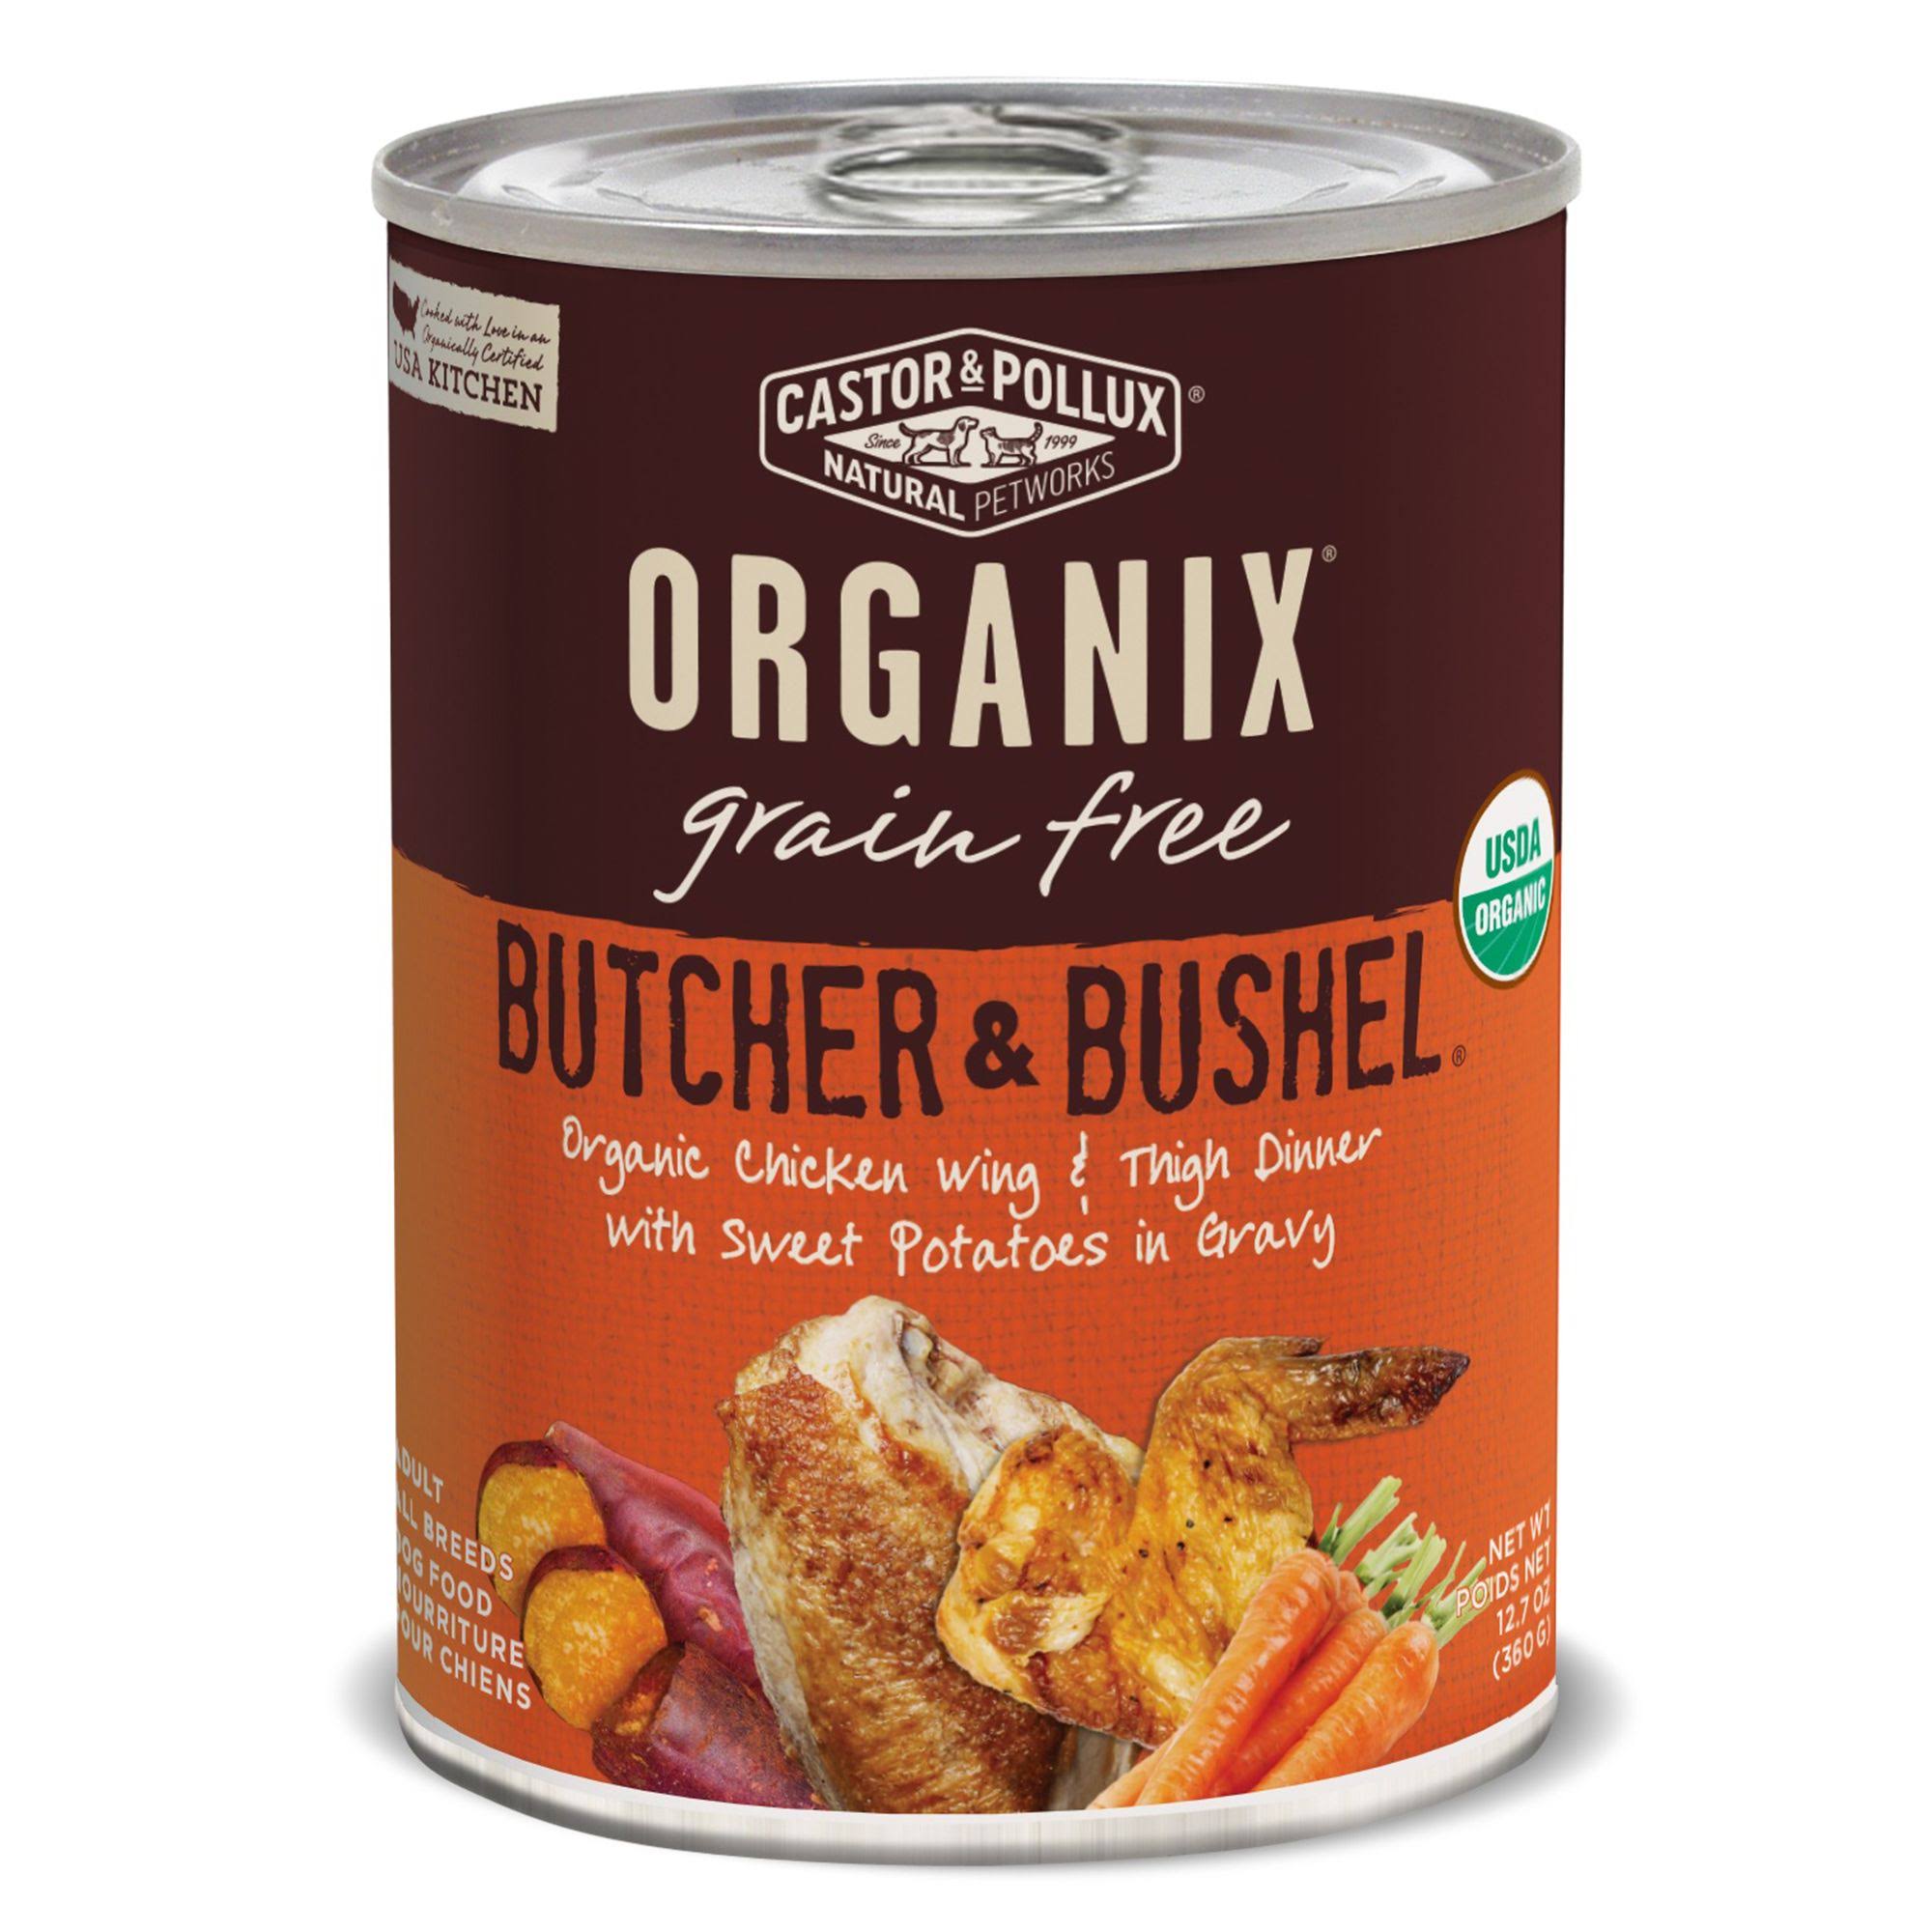 Castor and Pollux Organix Butcher and Bushel Dog Food - Organic Chicken Wing and Thigh Dinner with Sweet Potatoes in Gravy, 12.7oz